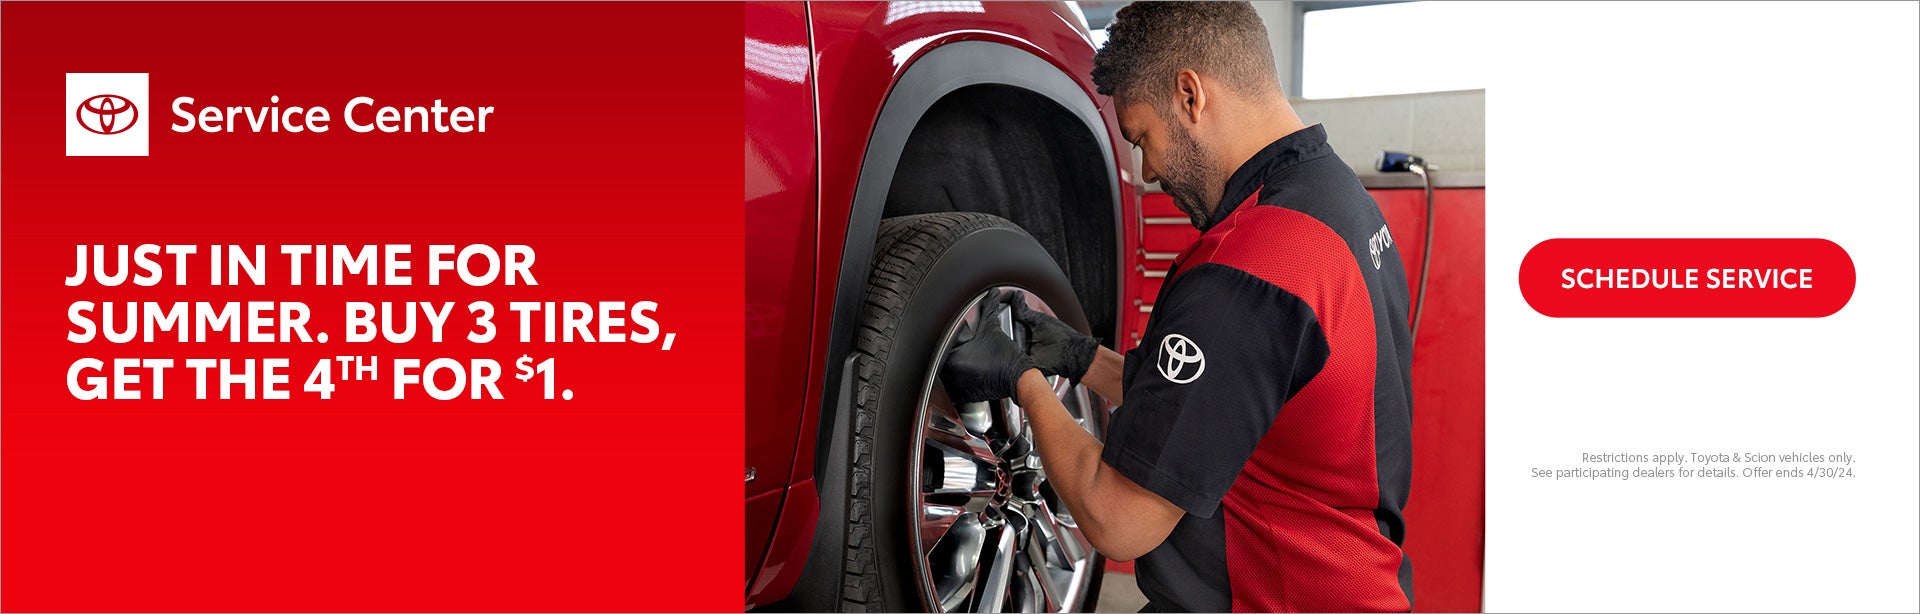 Just in time for Summer. Buy 3 tires, get the 4th one for $1